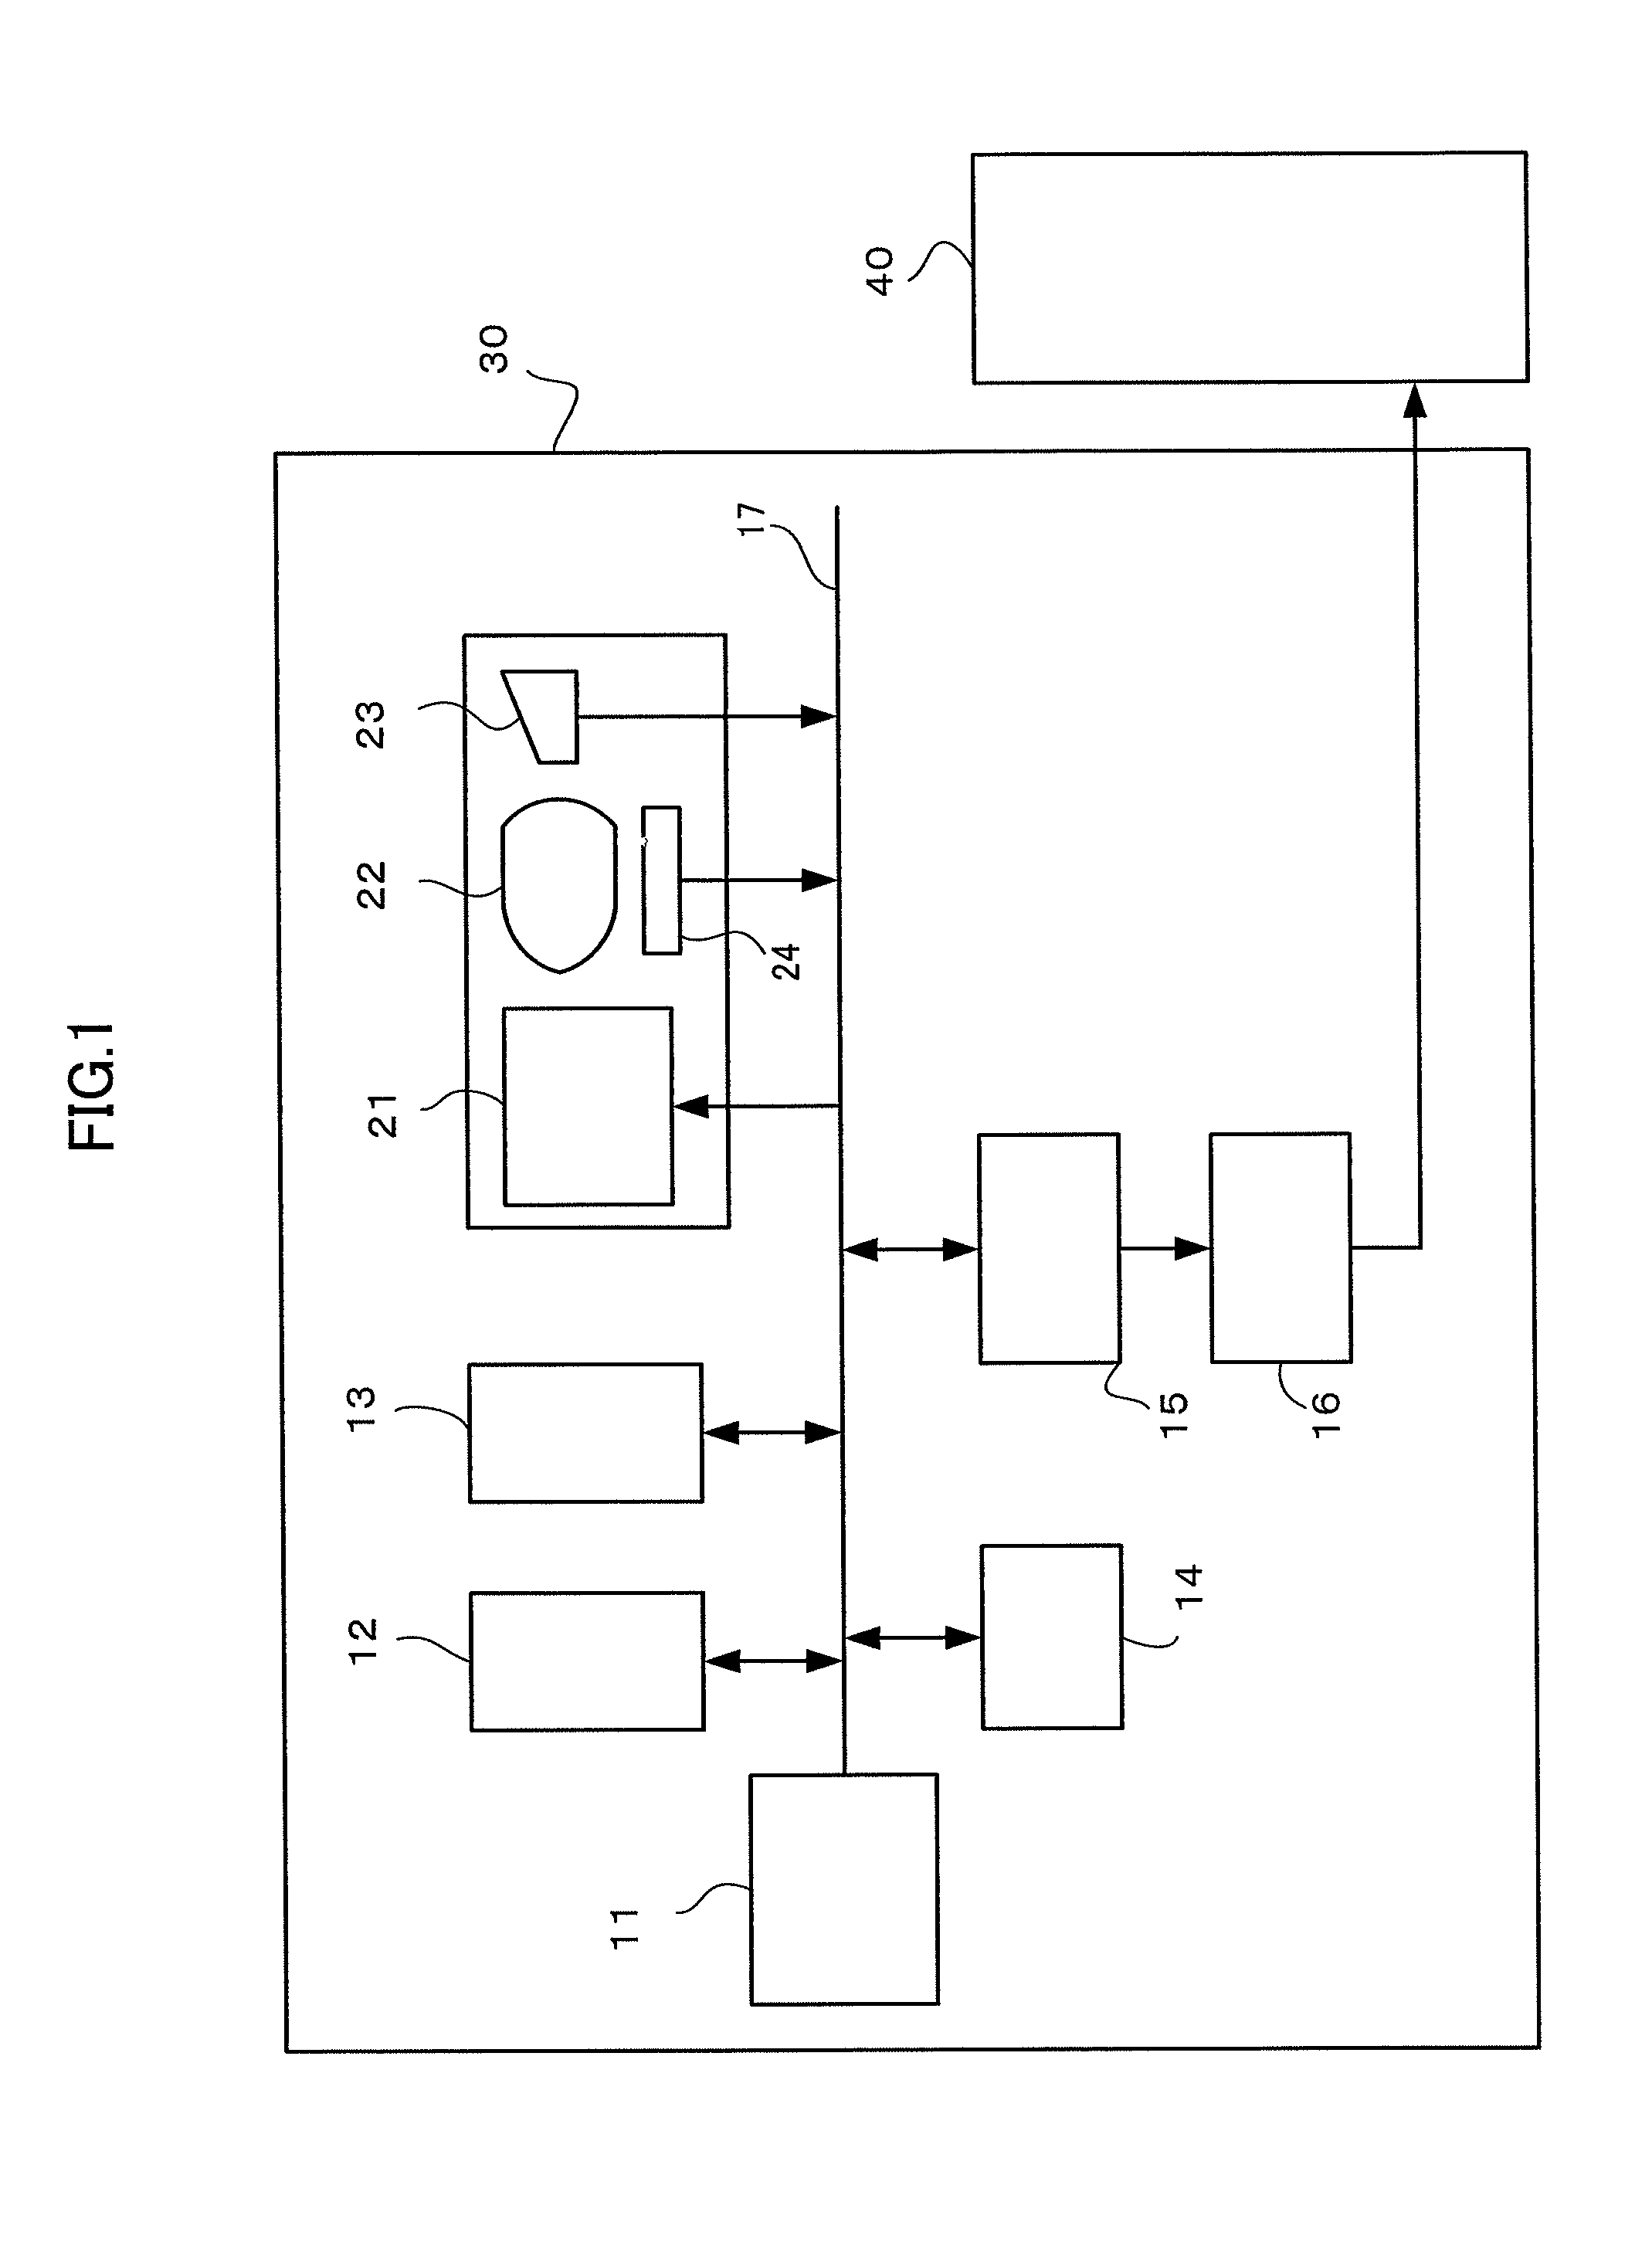 Numerical controller for machine tool with work supporting control part